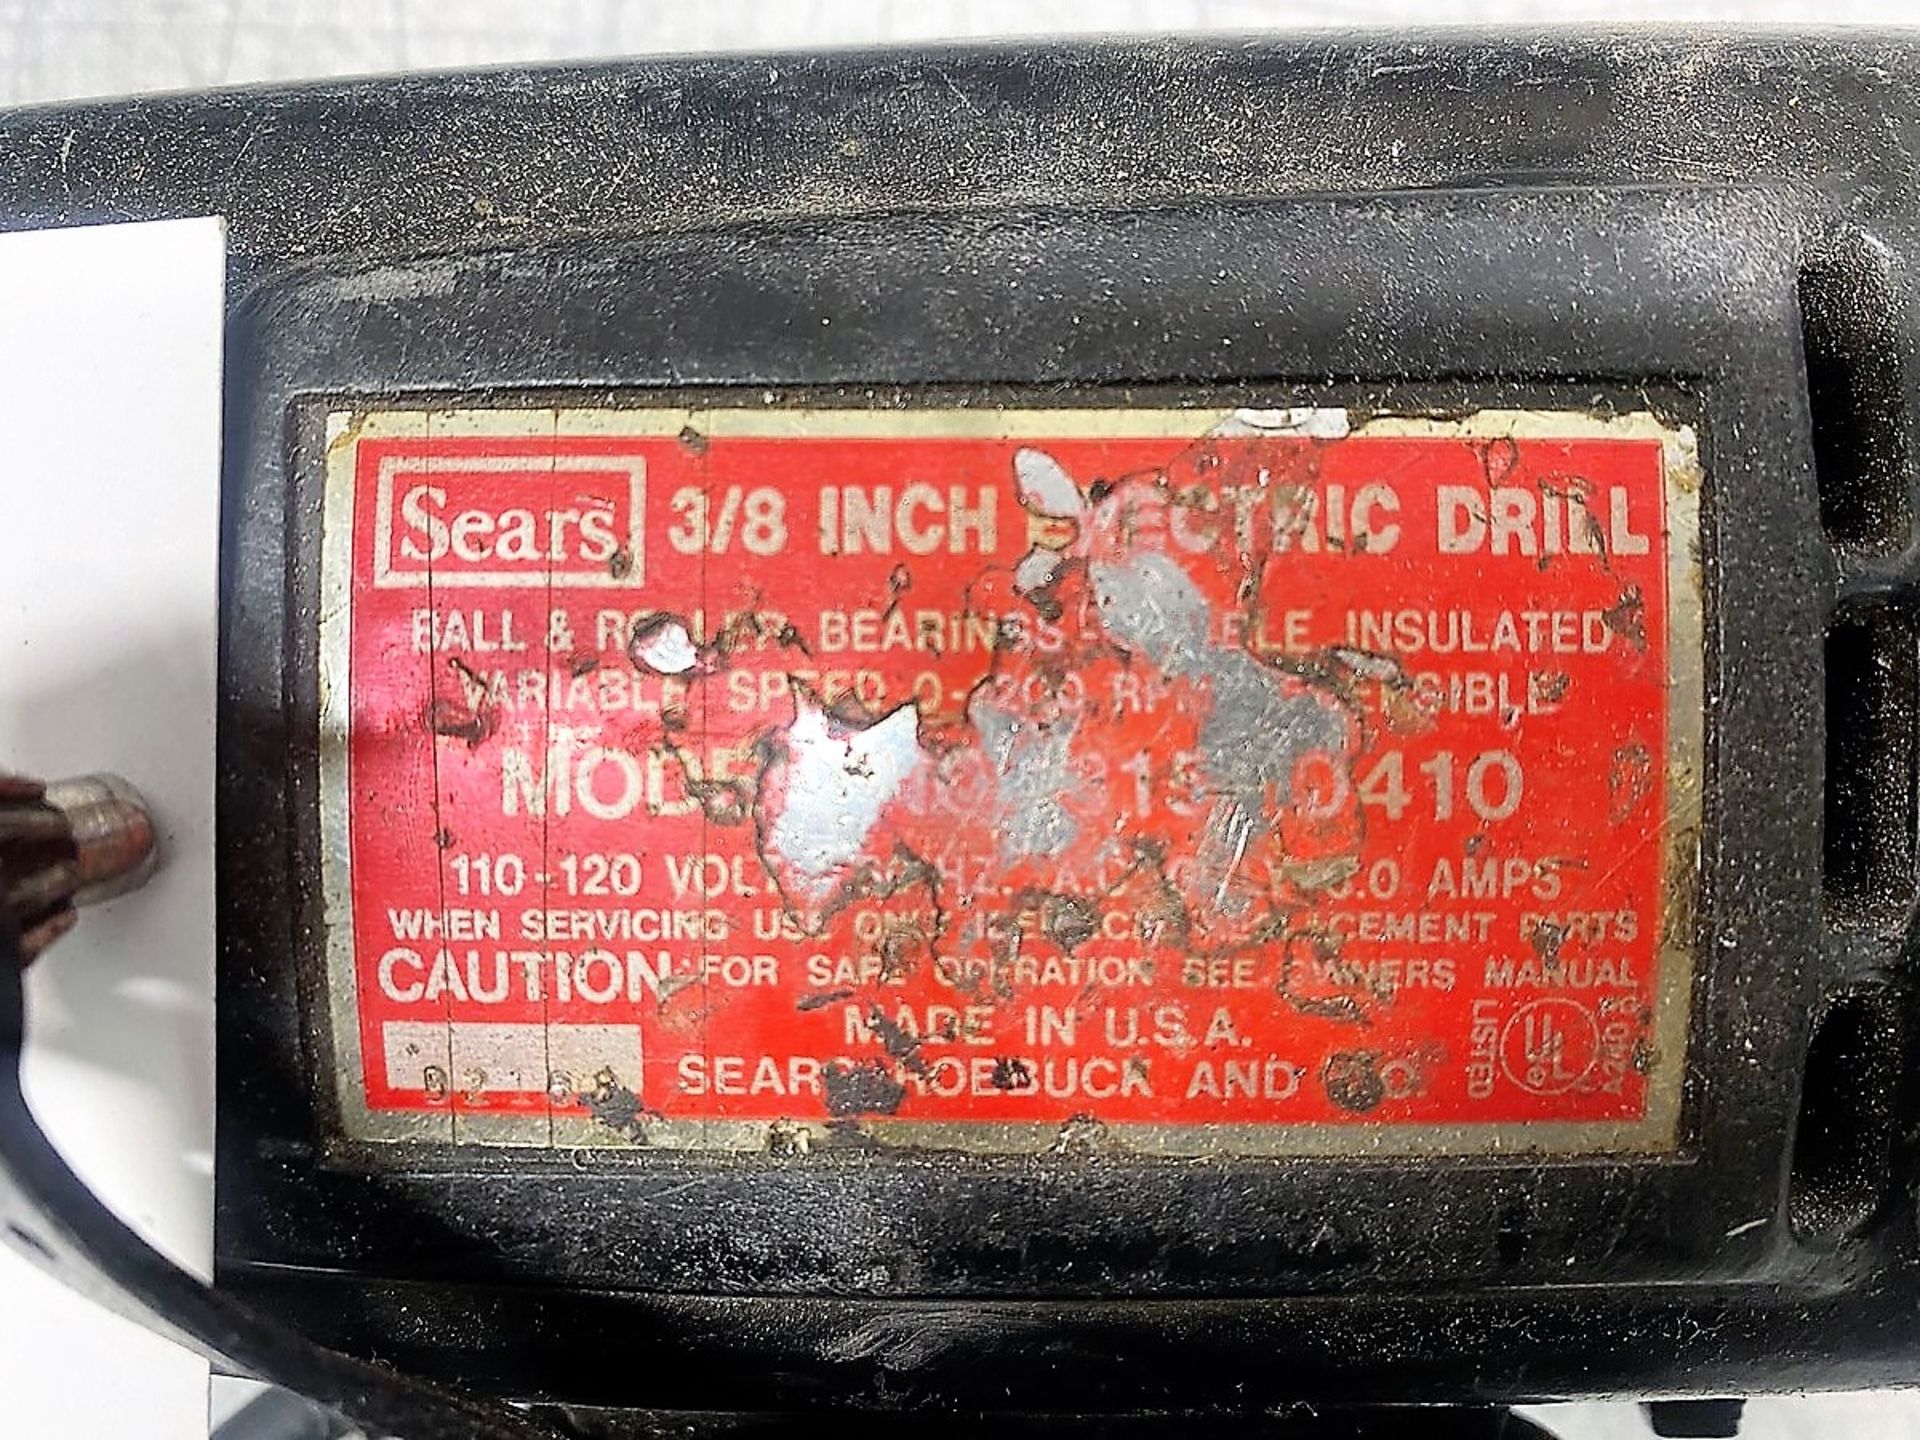 Sears 3/8" Electric Drill - Image 2 of 2